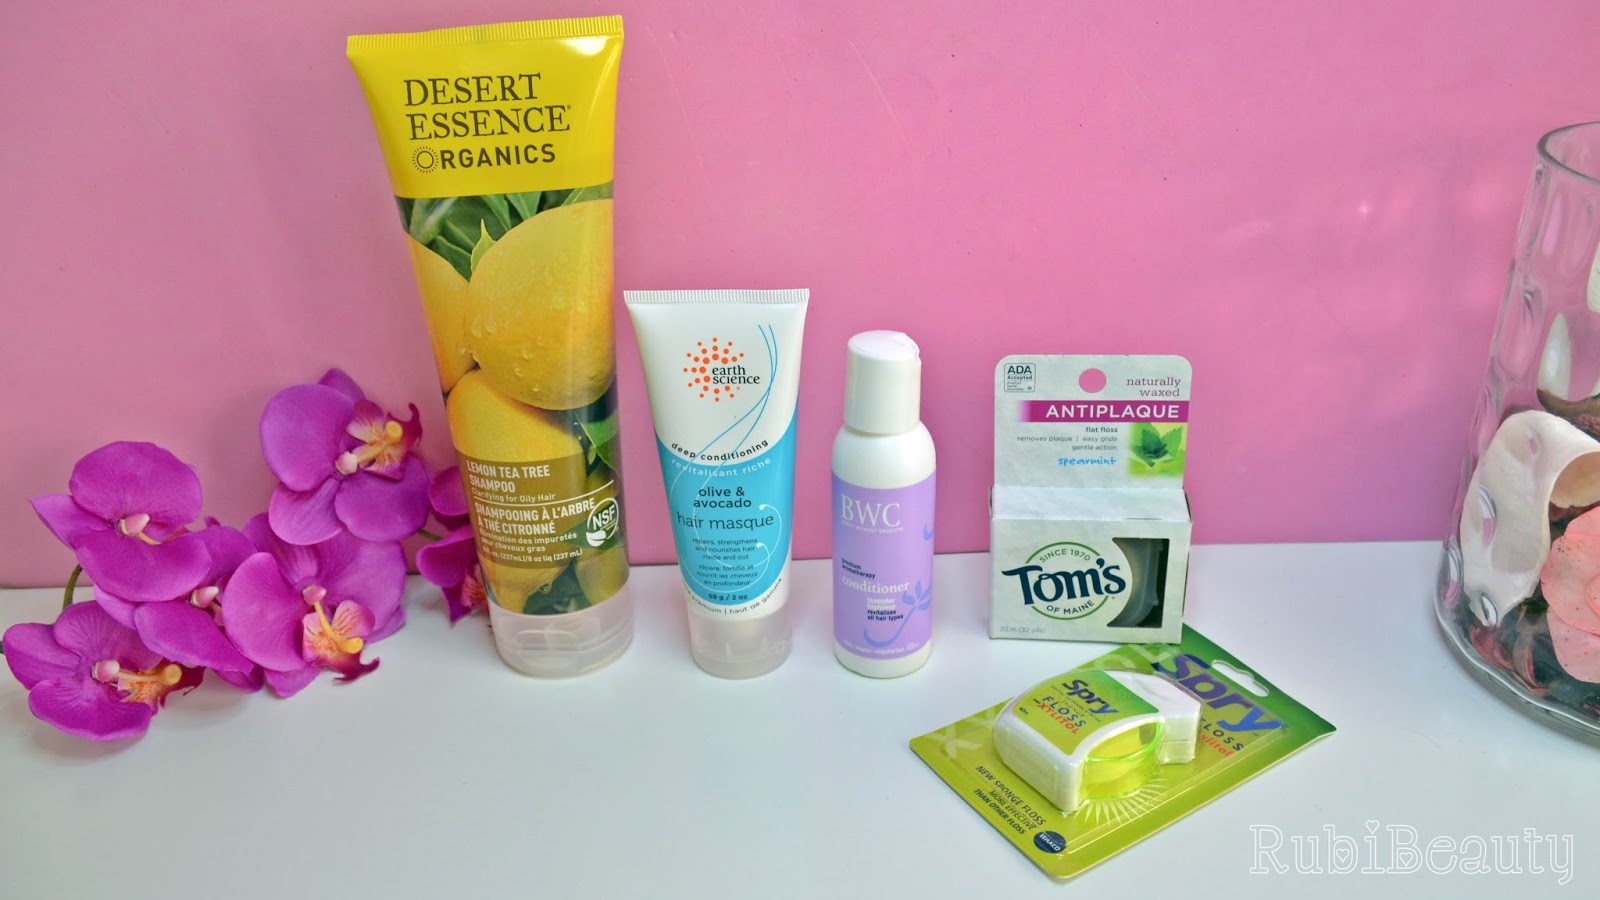 iherb haul review impresiones opinion compras desert essence earth science BWC